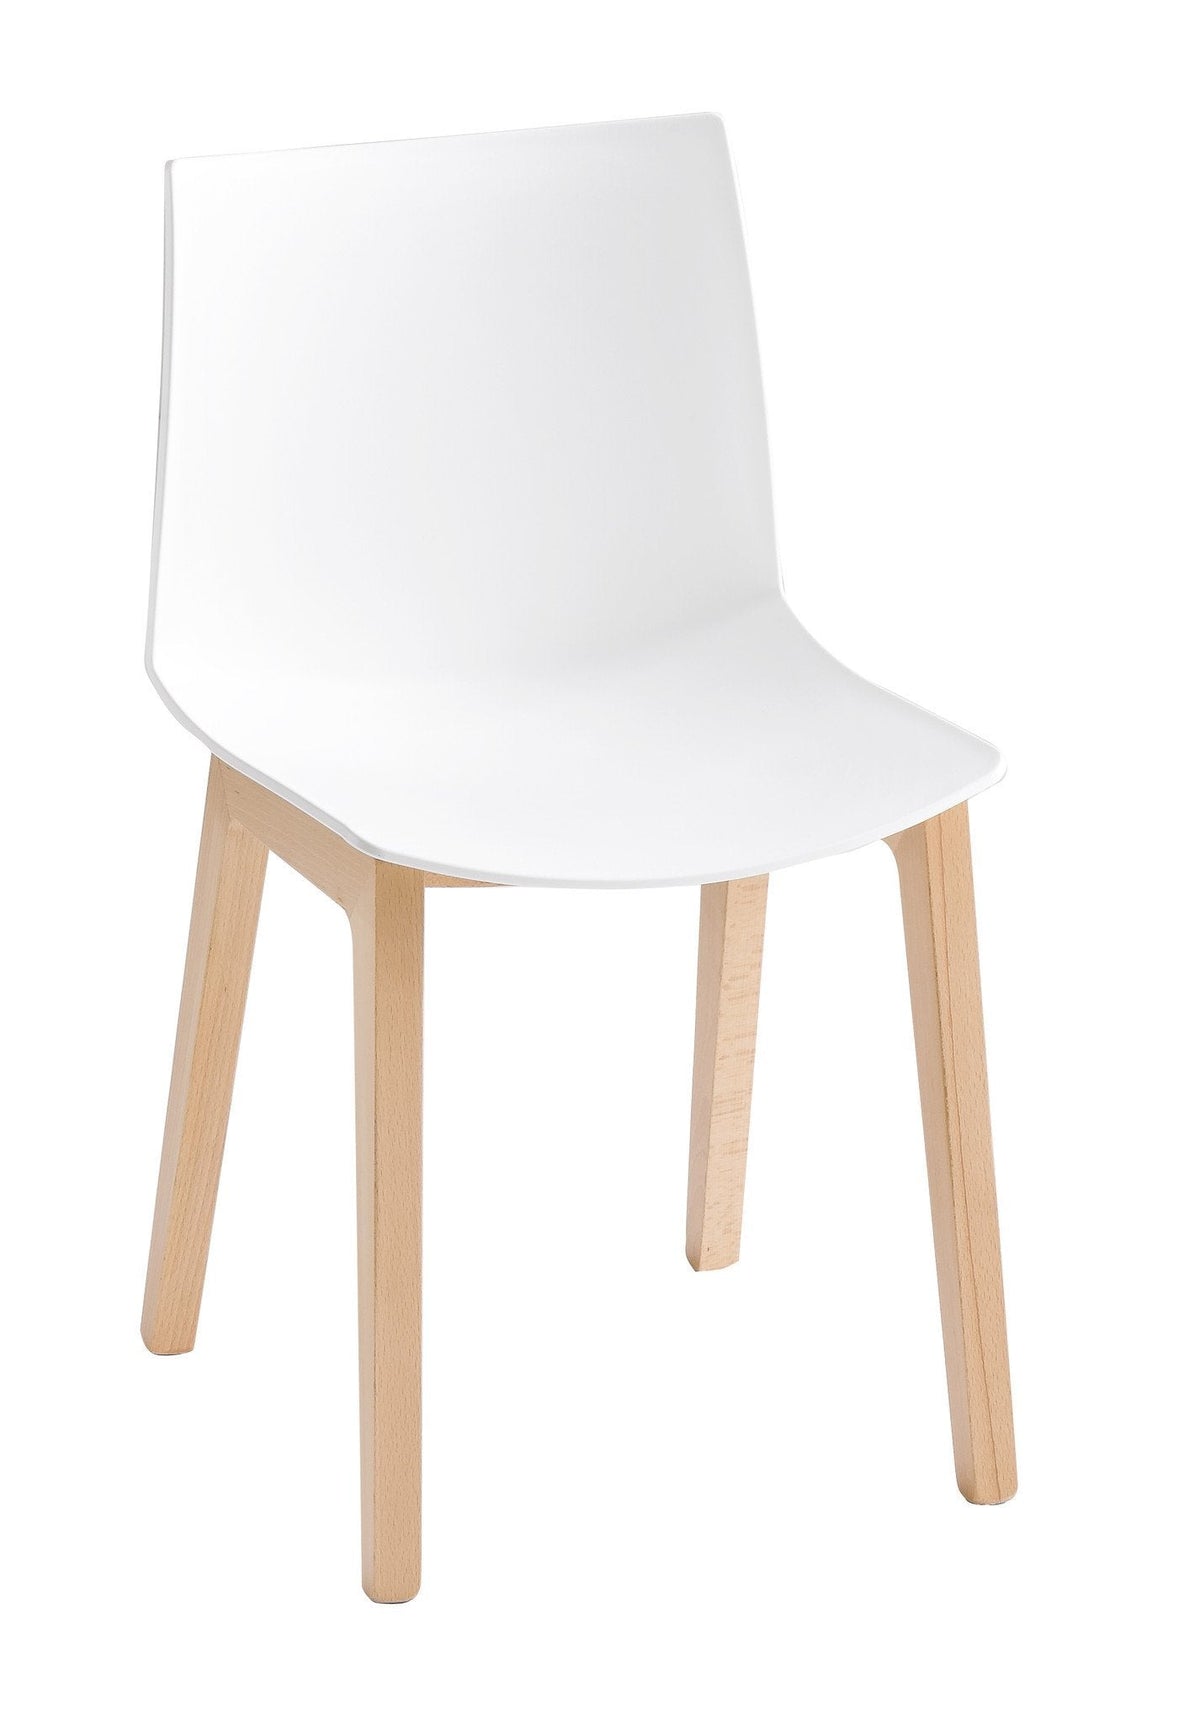 Kanvas Side Chair c/w Wood Legs-Gaber-Contract Furniture Store